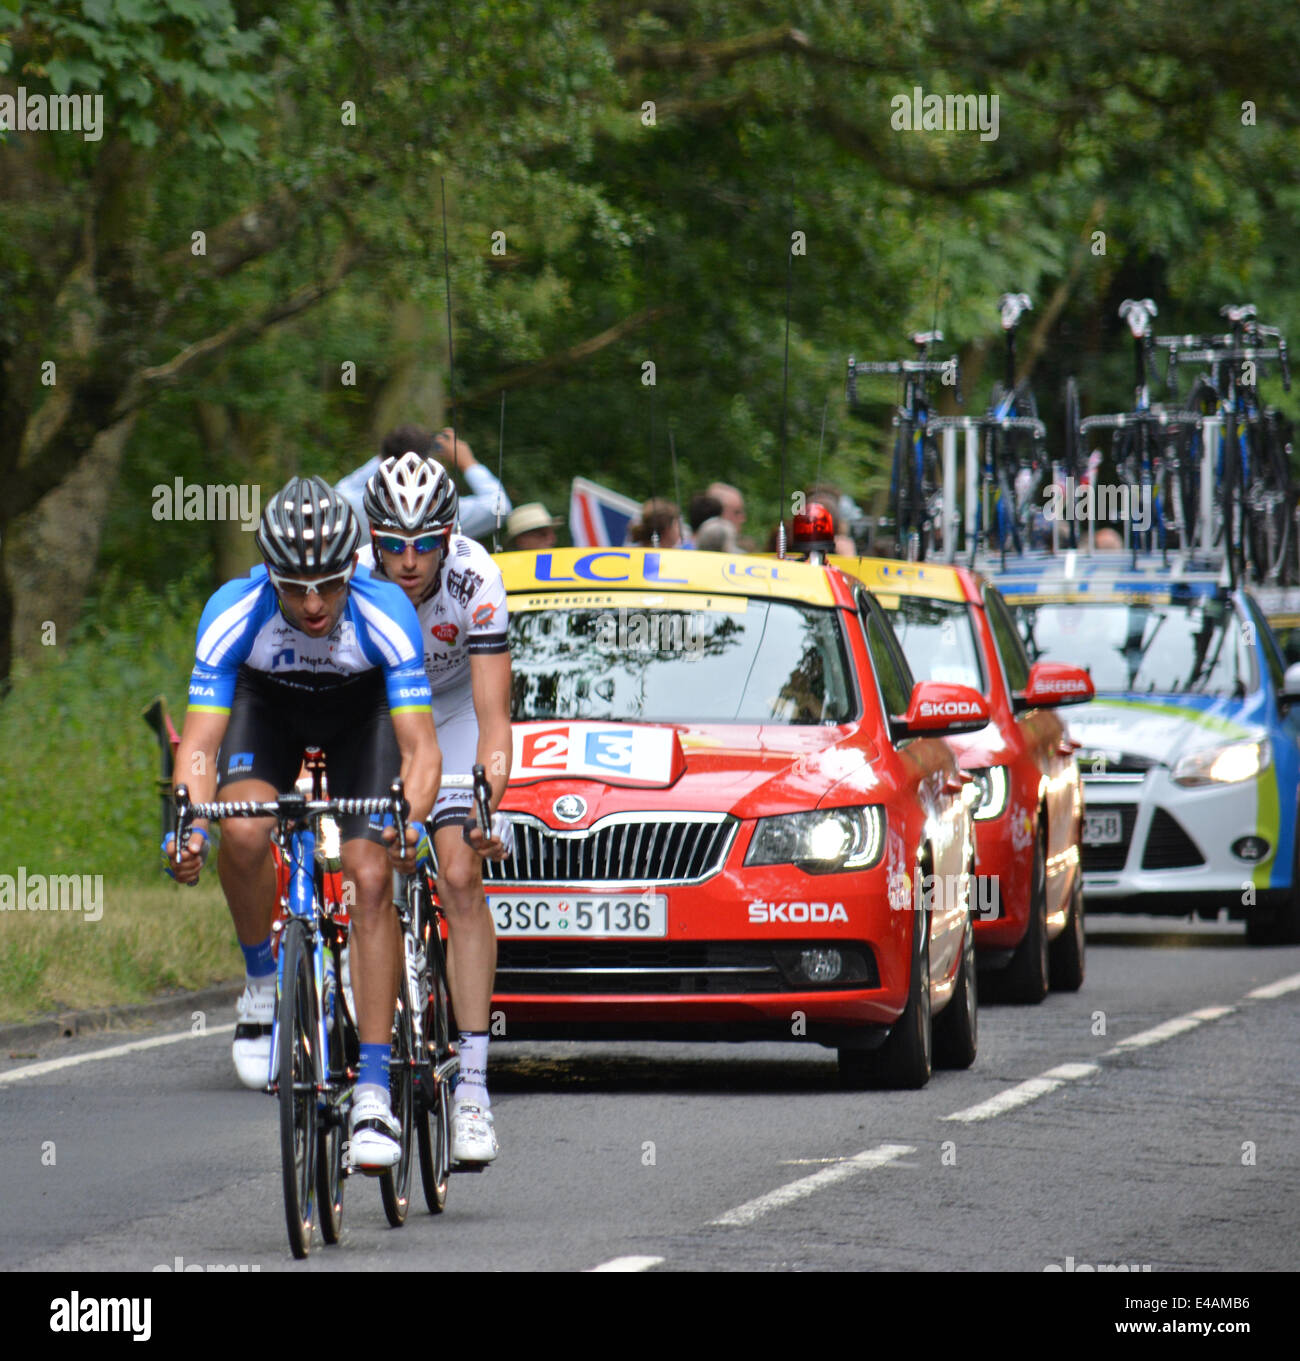 Epping, UK. 07th July, 2014. Tour de France 2014 from Cambridge to London. Participants (Jan Barta leading the way) enter into Epping, Essex on their way to London. 7th July 2014. Credit:  doniphane dupriez/Alamy Live News Stock Photo